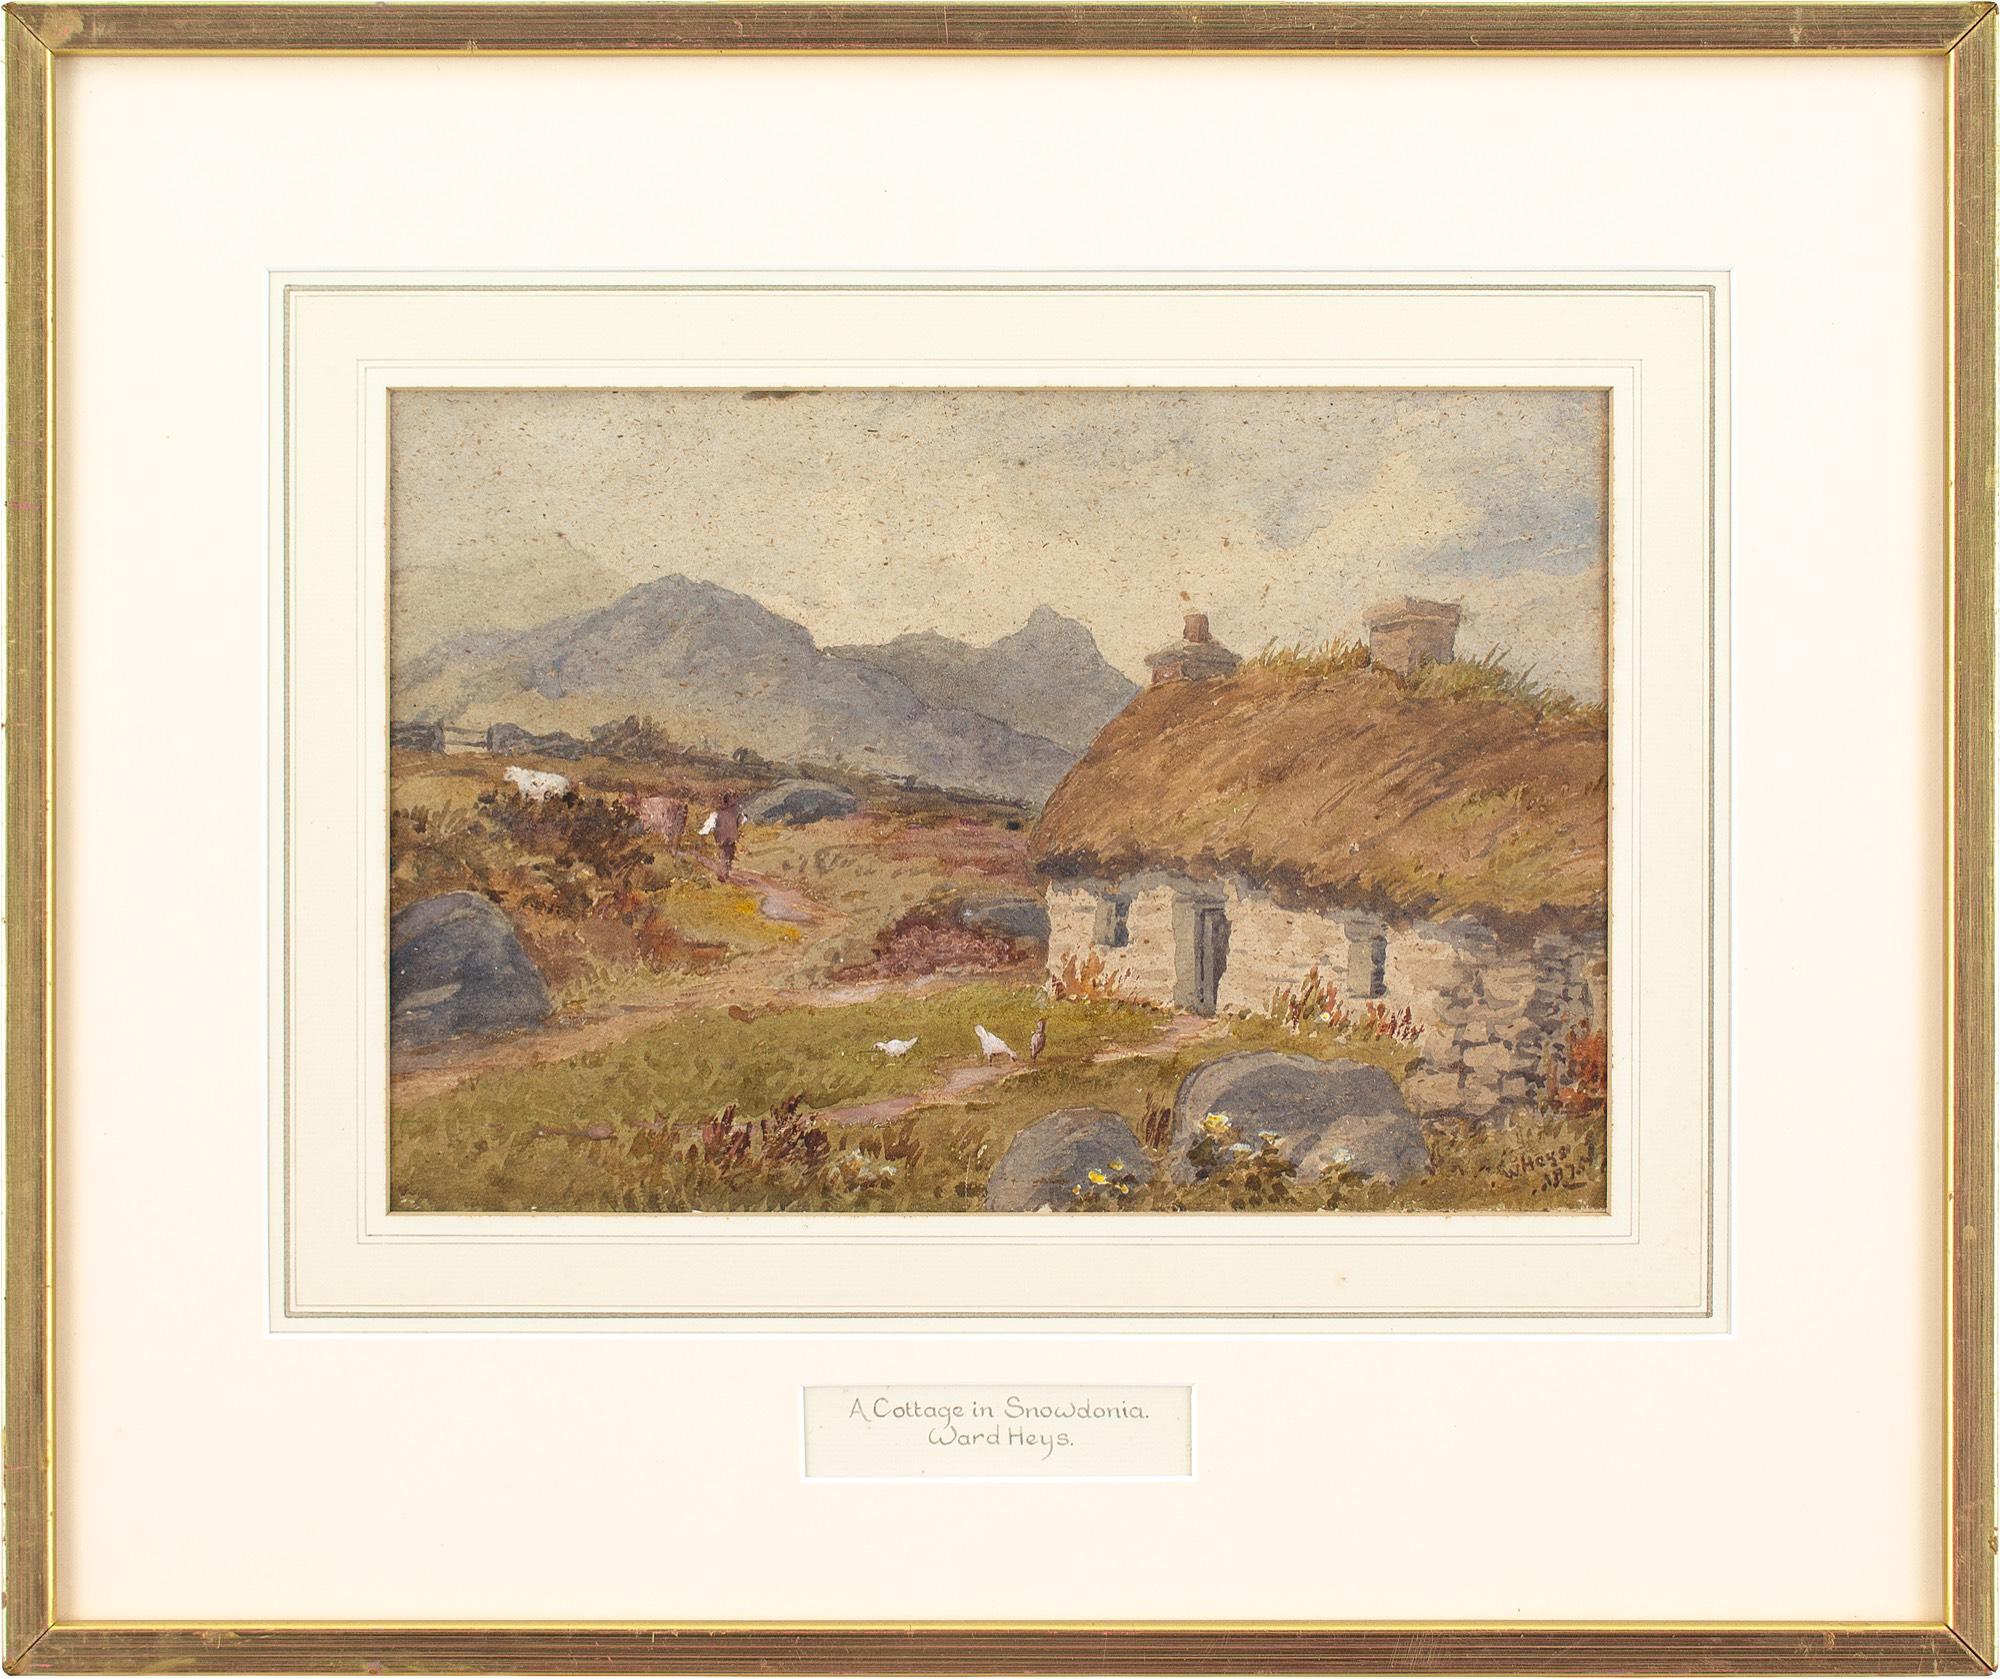 This rugged late 19th-century watercolour by British artist Ward Heys (1836-1911) depicts a Snowdonian landscape with thatched cottage, figure and chickens.

Perched alongside a ramshackle cottage amid lofty environs, the artist sets to work.